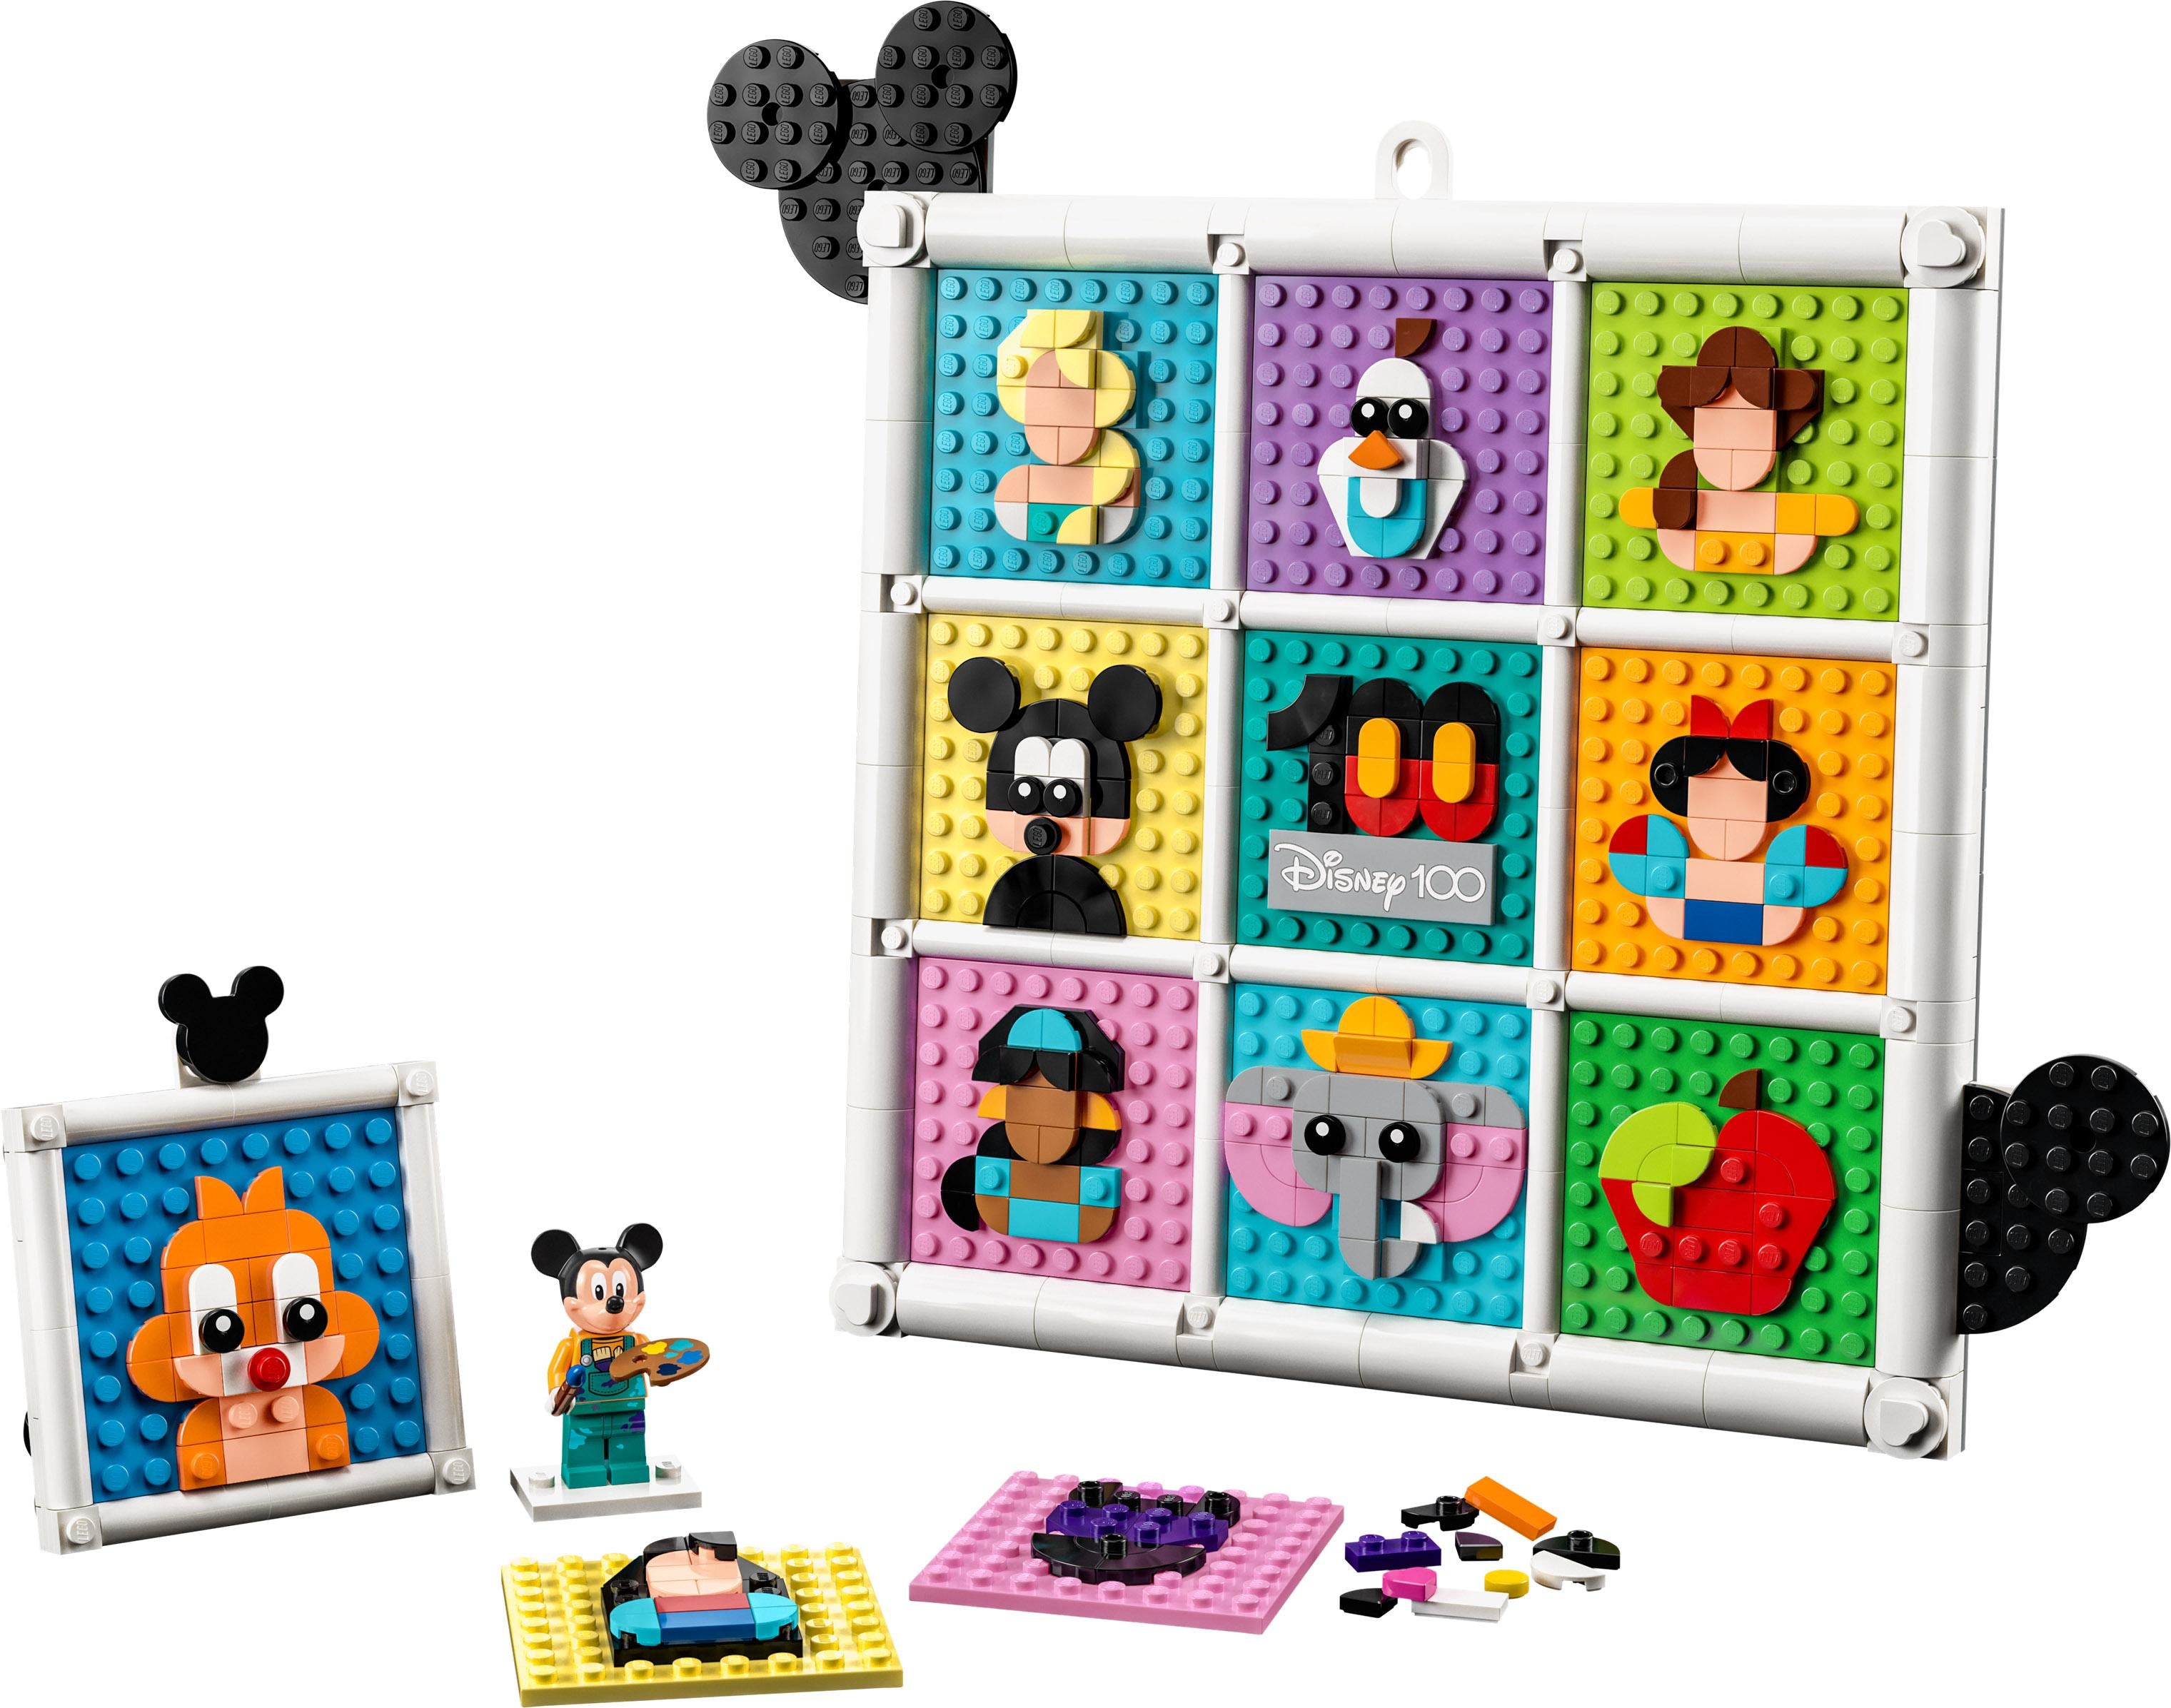 LEGO 43221 Disney 100 Years of Disney Animation Icons, Character Wall Art Craft Set, 72 Fun Mosaic Designs to Create, Includes Exclusive Mickey Mouse Artist Minifigure, Toy for Kids